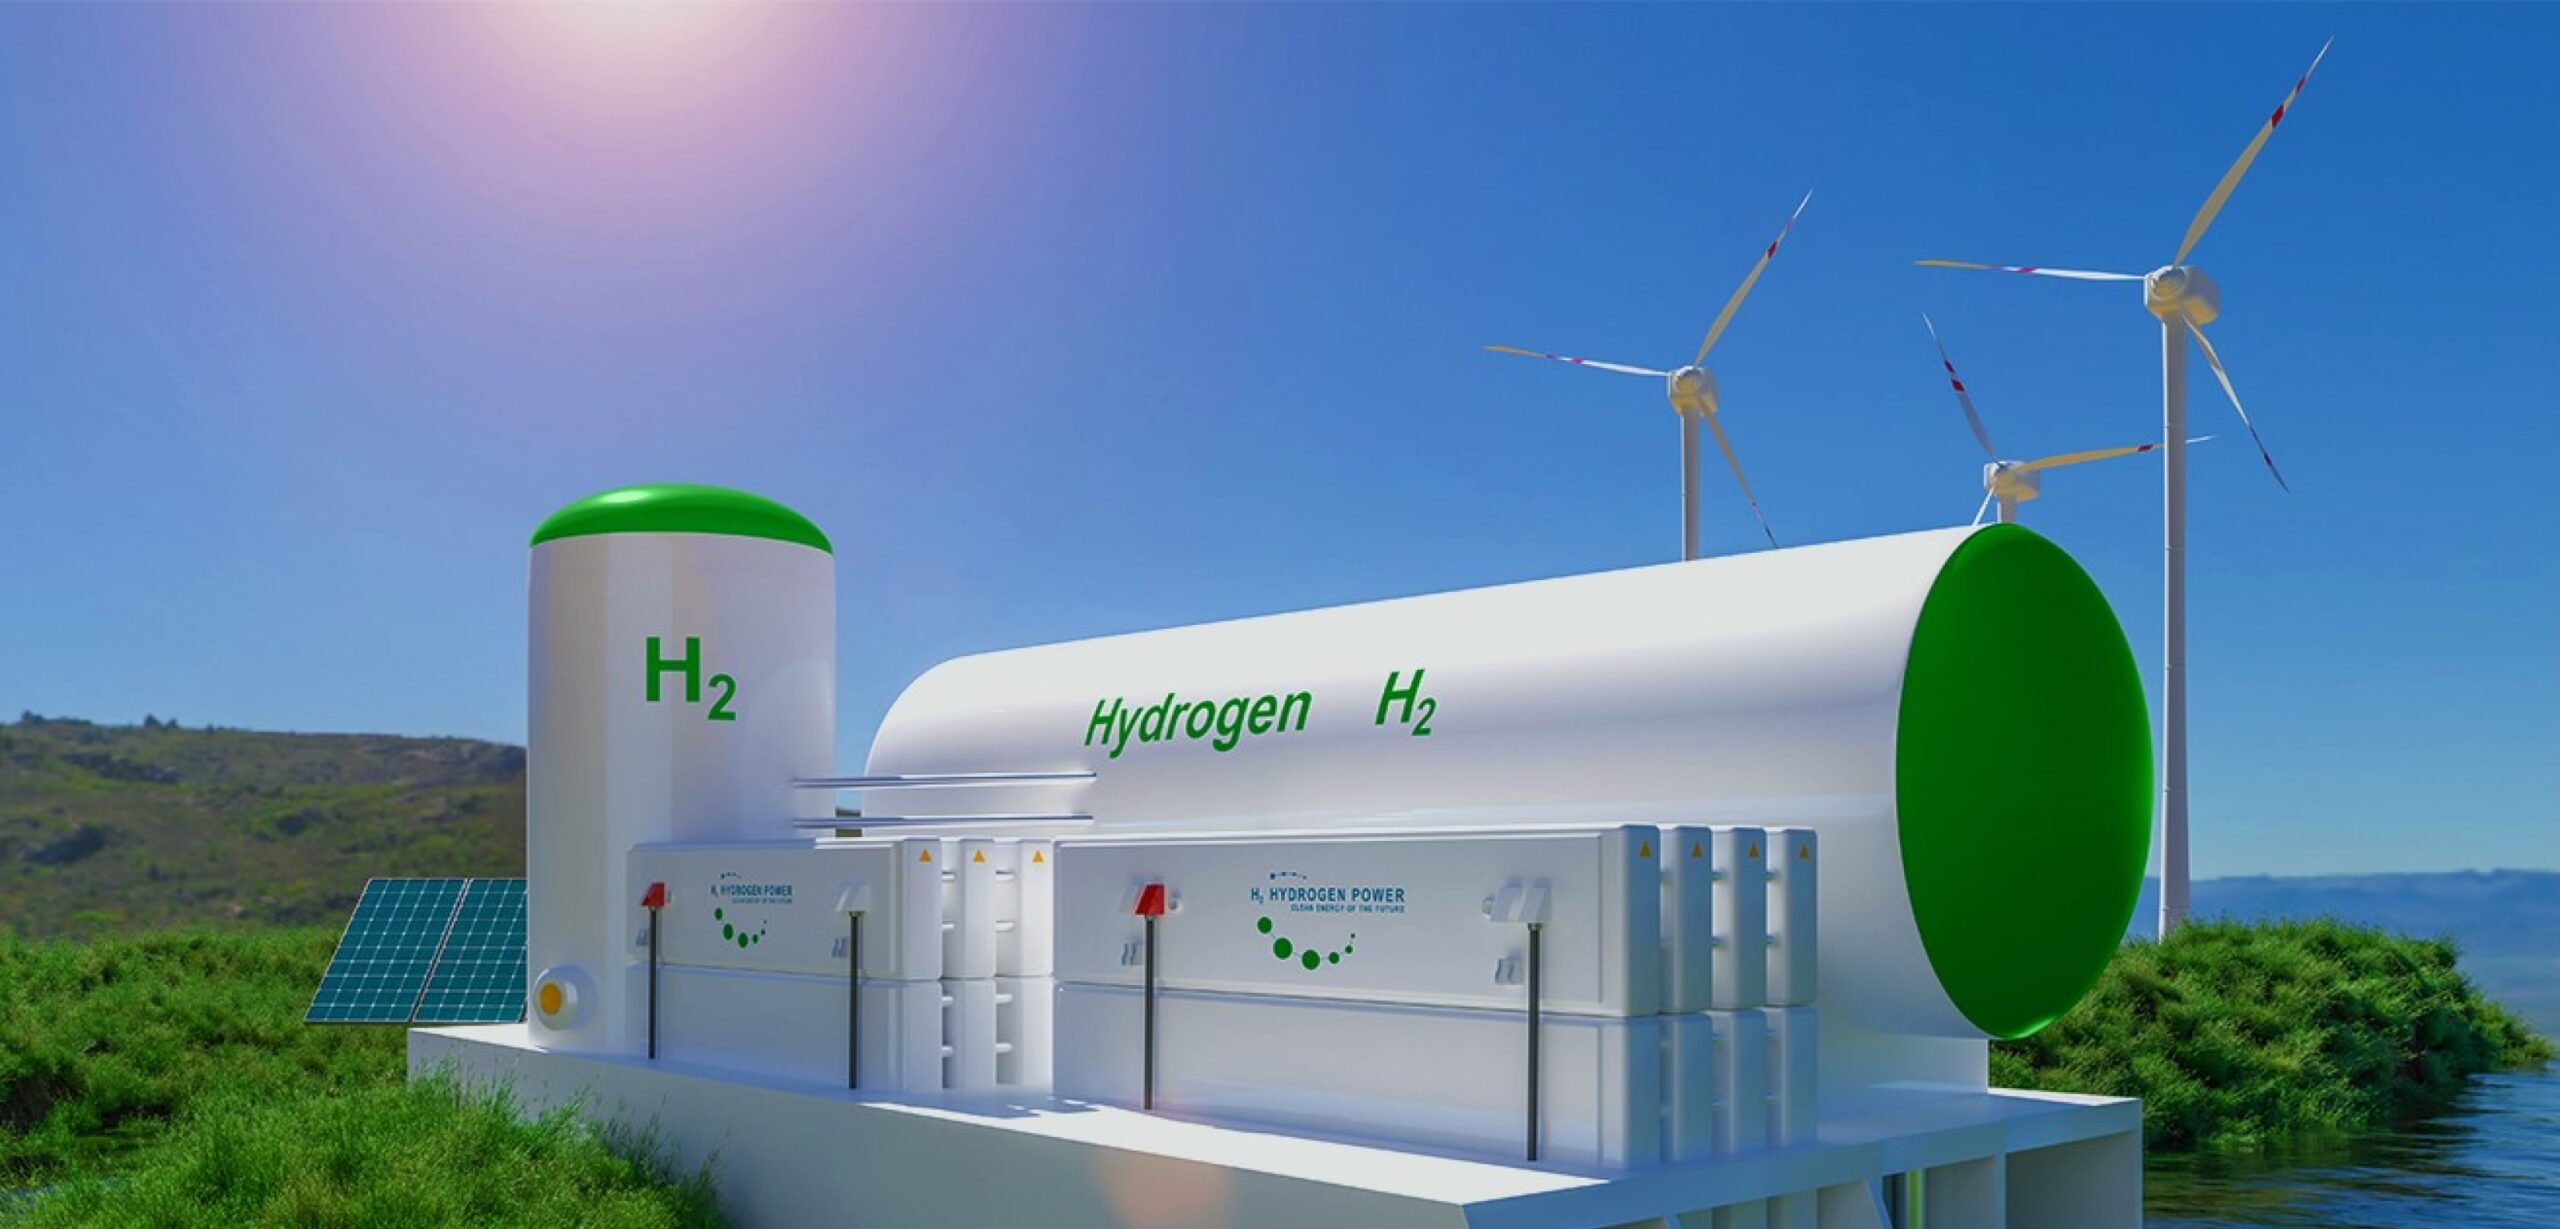 China’s Green Hydrogen Production Surpasses National Targets